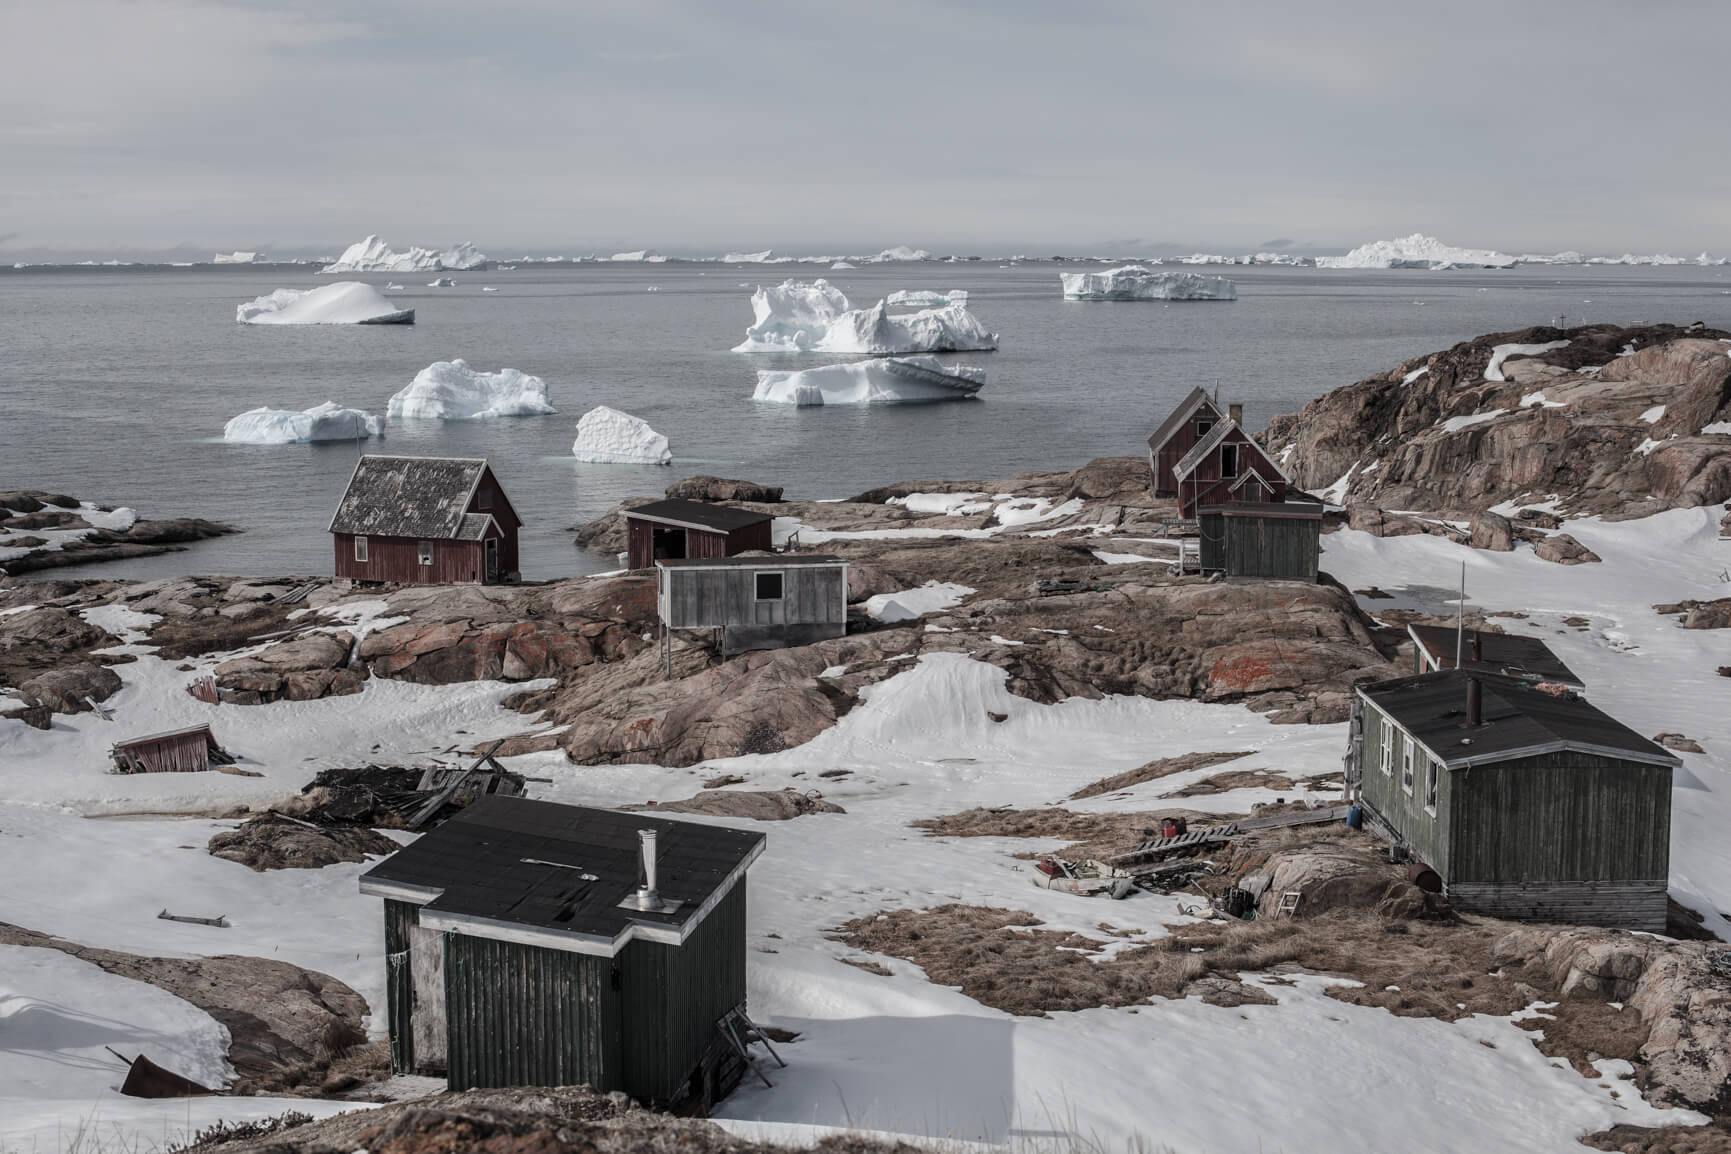 An abandoned village in Northern Greenland is uncovering from the snow, which is slowly melting away from the base of several of the houses, built on a rocky coastline to the Arctic Ocean, where huge chunks of ice are flowing in the icy gray waters. The houses are either red or gray and mostly one story high.